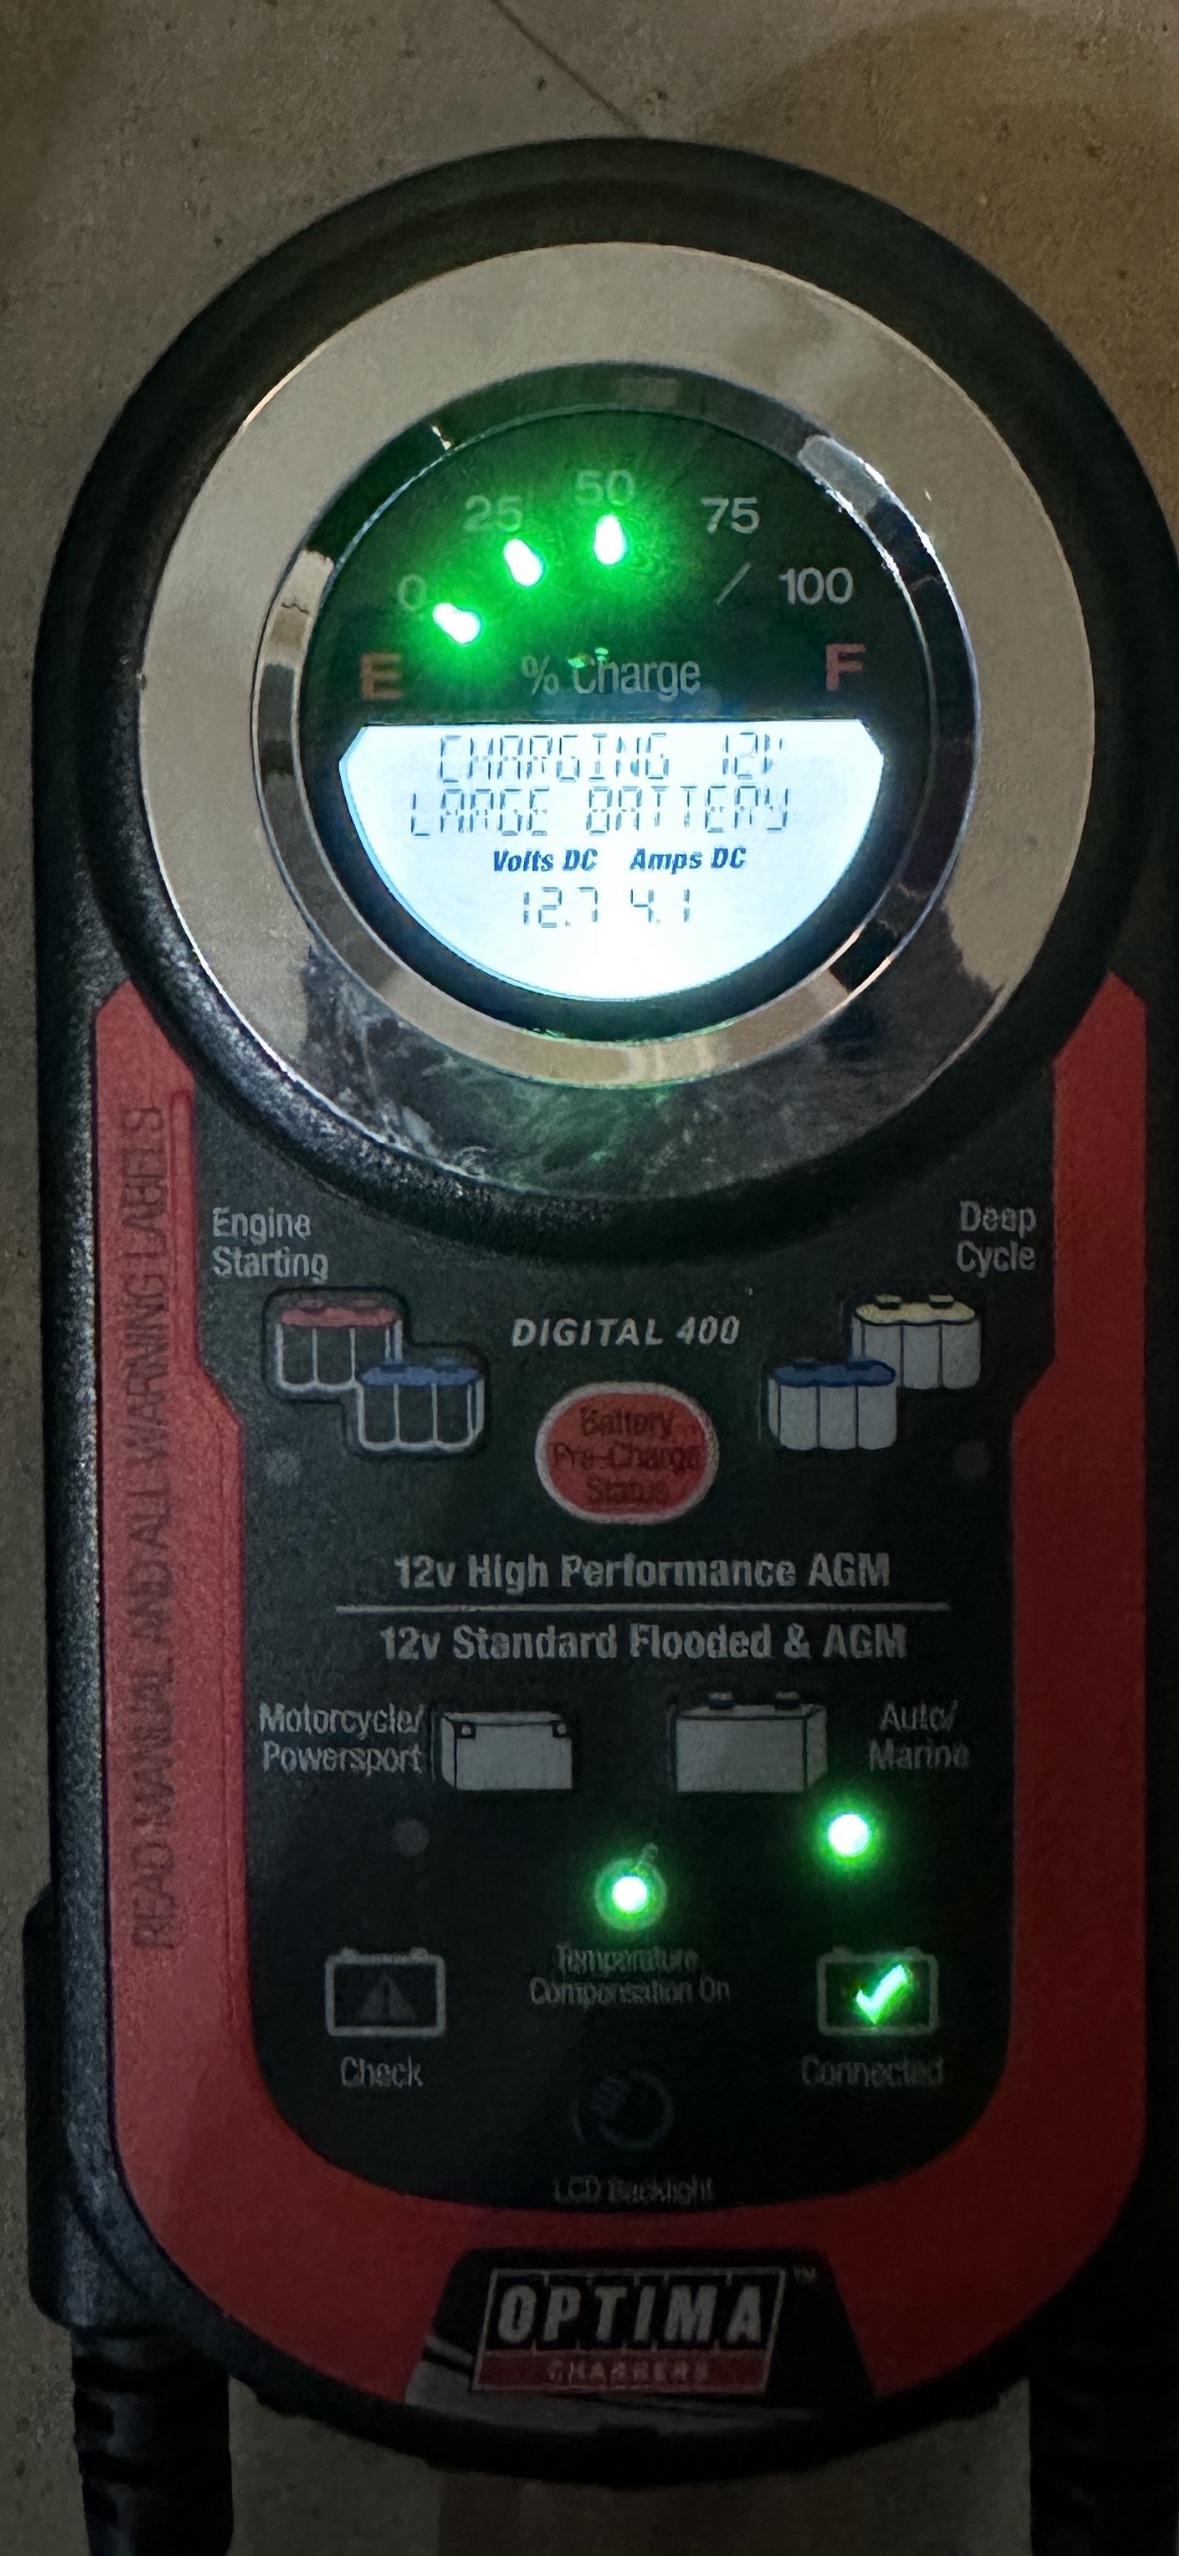 S650 Mustang Remote features disabled to preserve battery - Fordpass message View recent photos